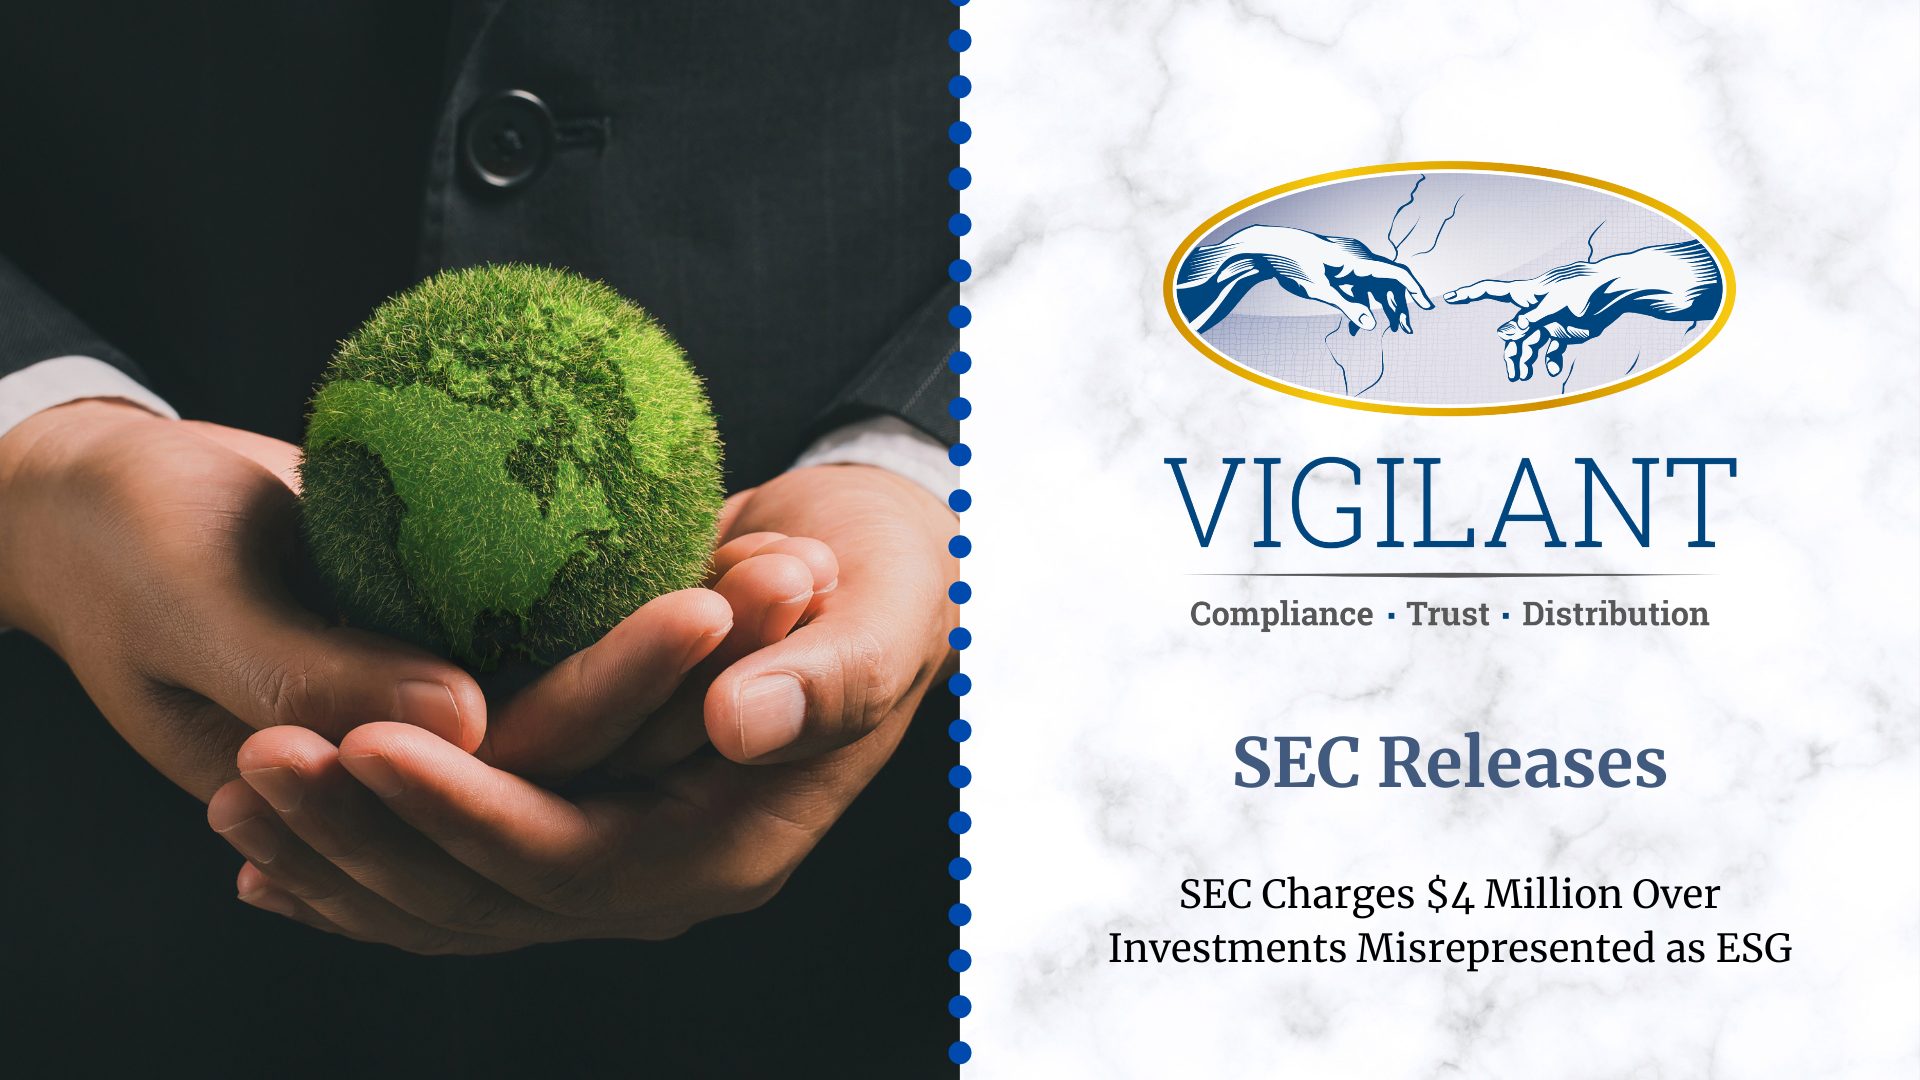 SEC Charges $4 Million Over Investments Misrepresented as ESG